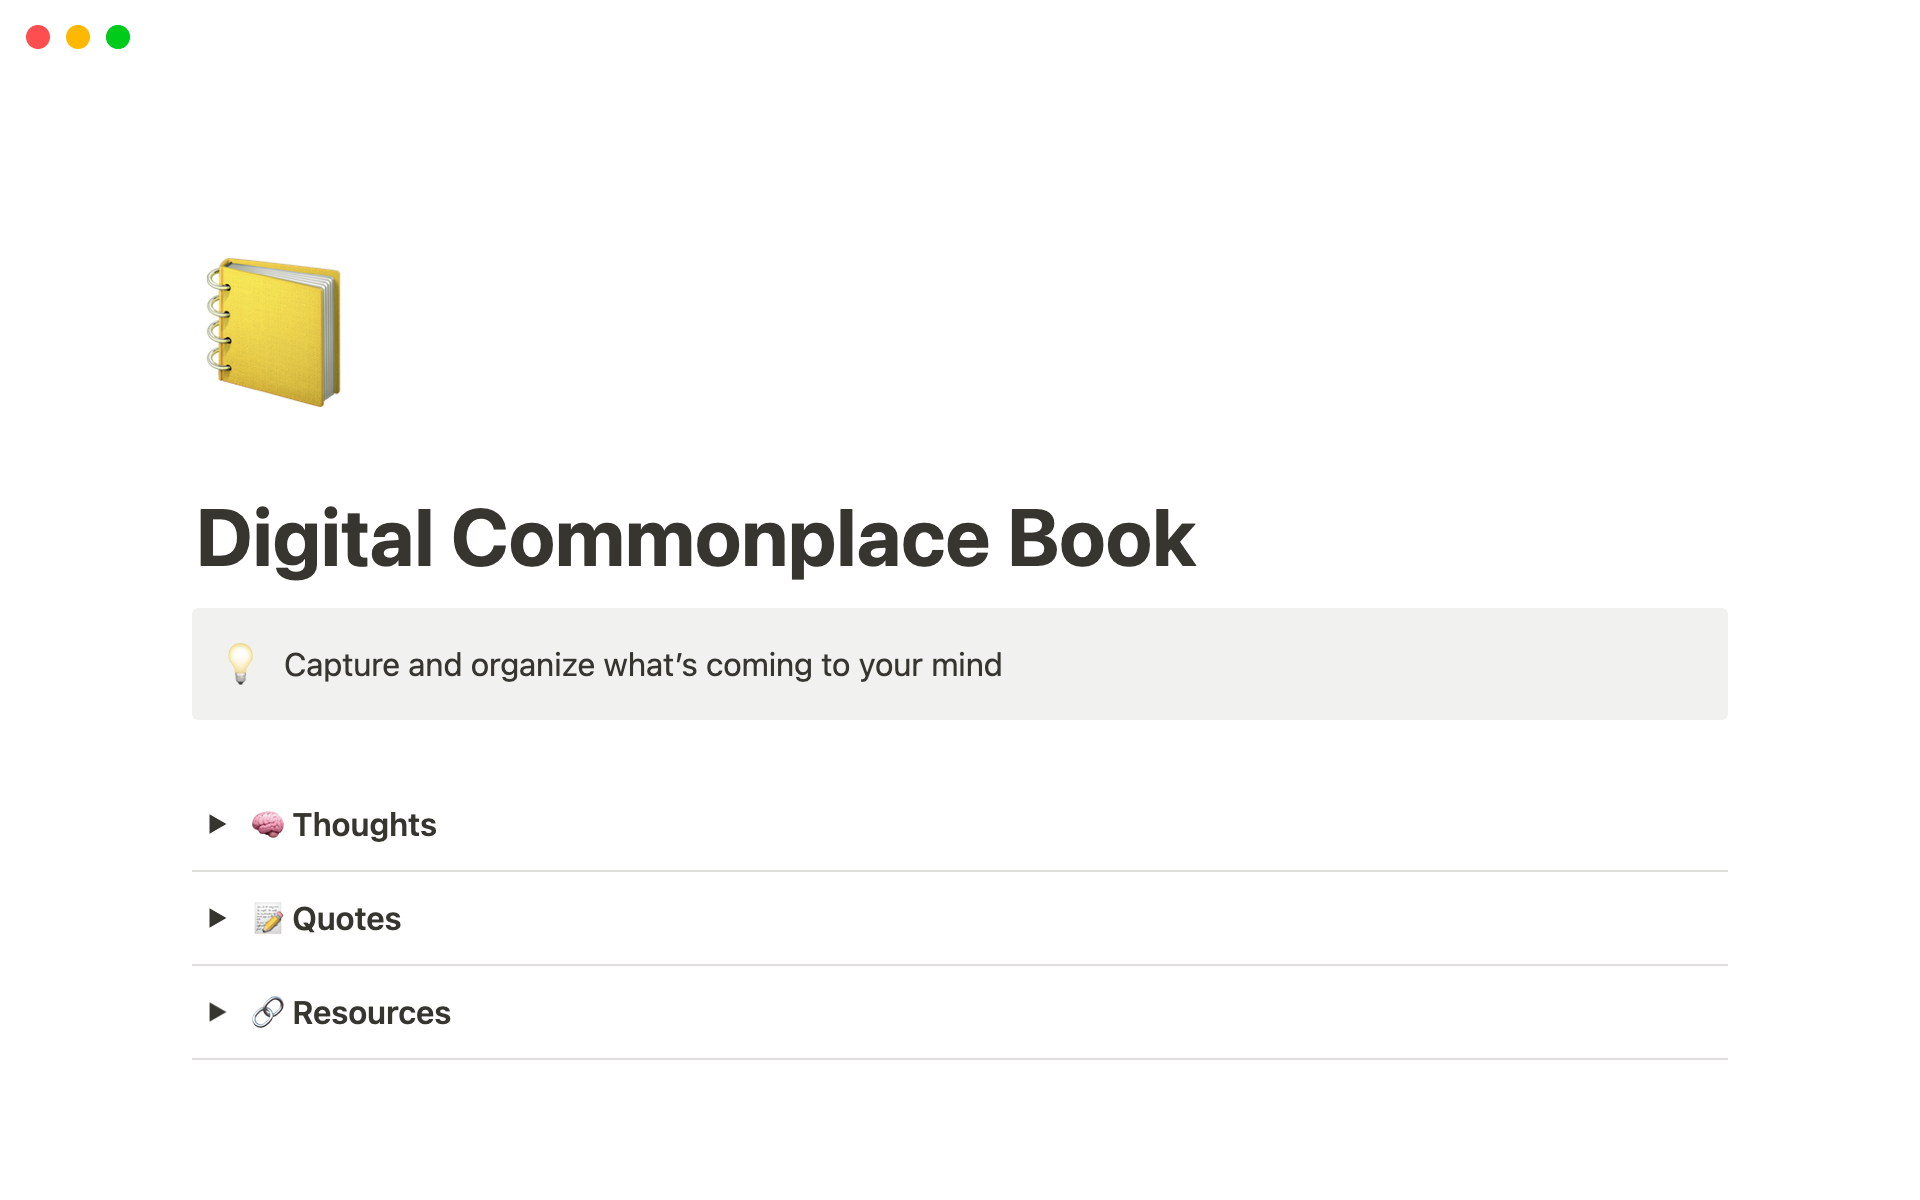 Organize thoughts, capture inspiration, curate quotes, and store resources in a digital commonplace book and second brain, all with a clean and minimalist design.